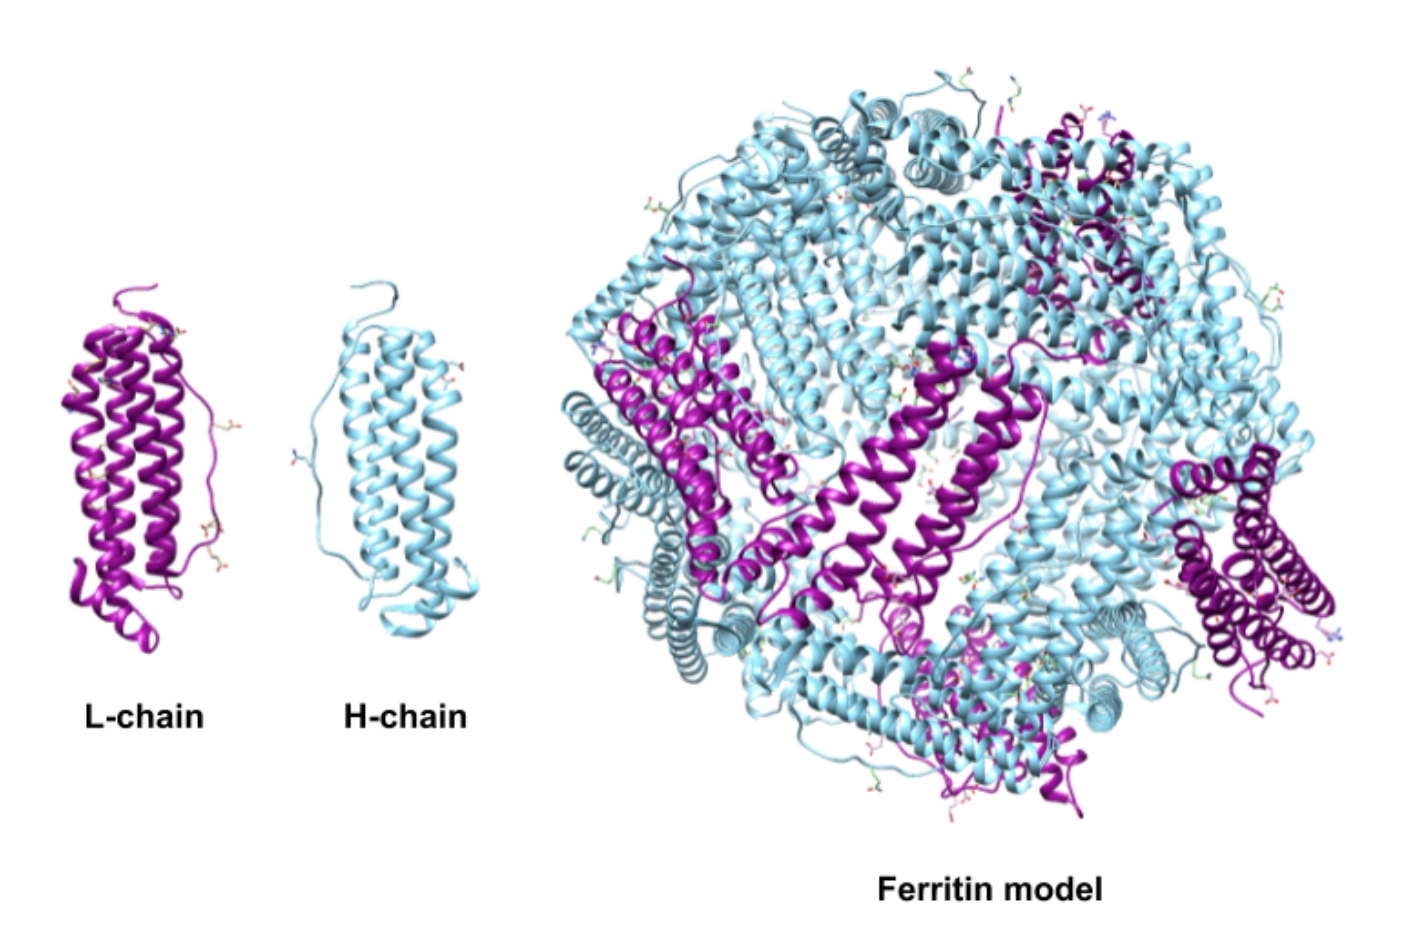 H (heavy) and L (light) subunits of ferritin, H subunits are shown in purple, and L subunits are shown in light blue